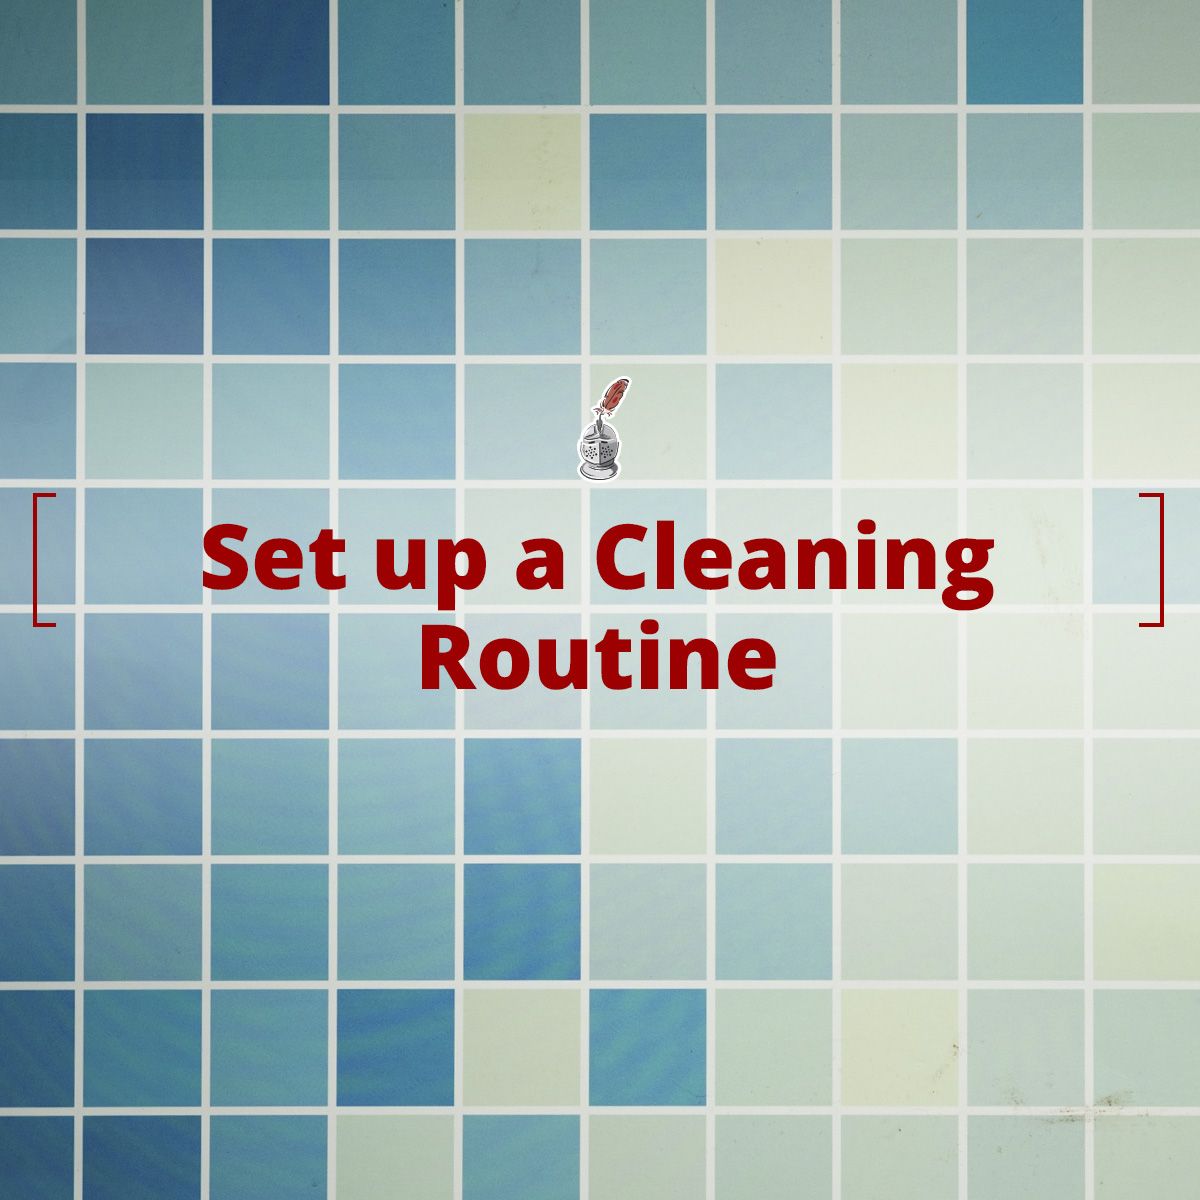 Set up a Cleaning Routine